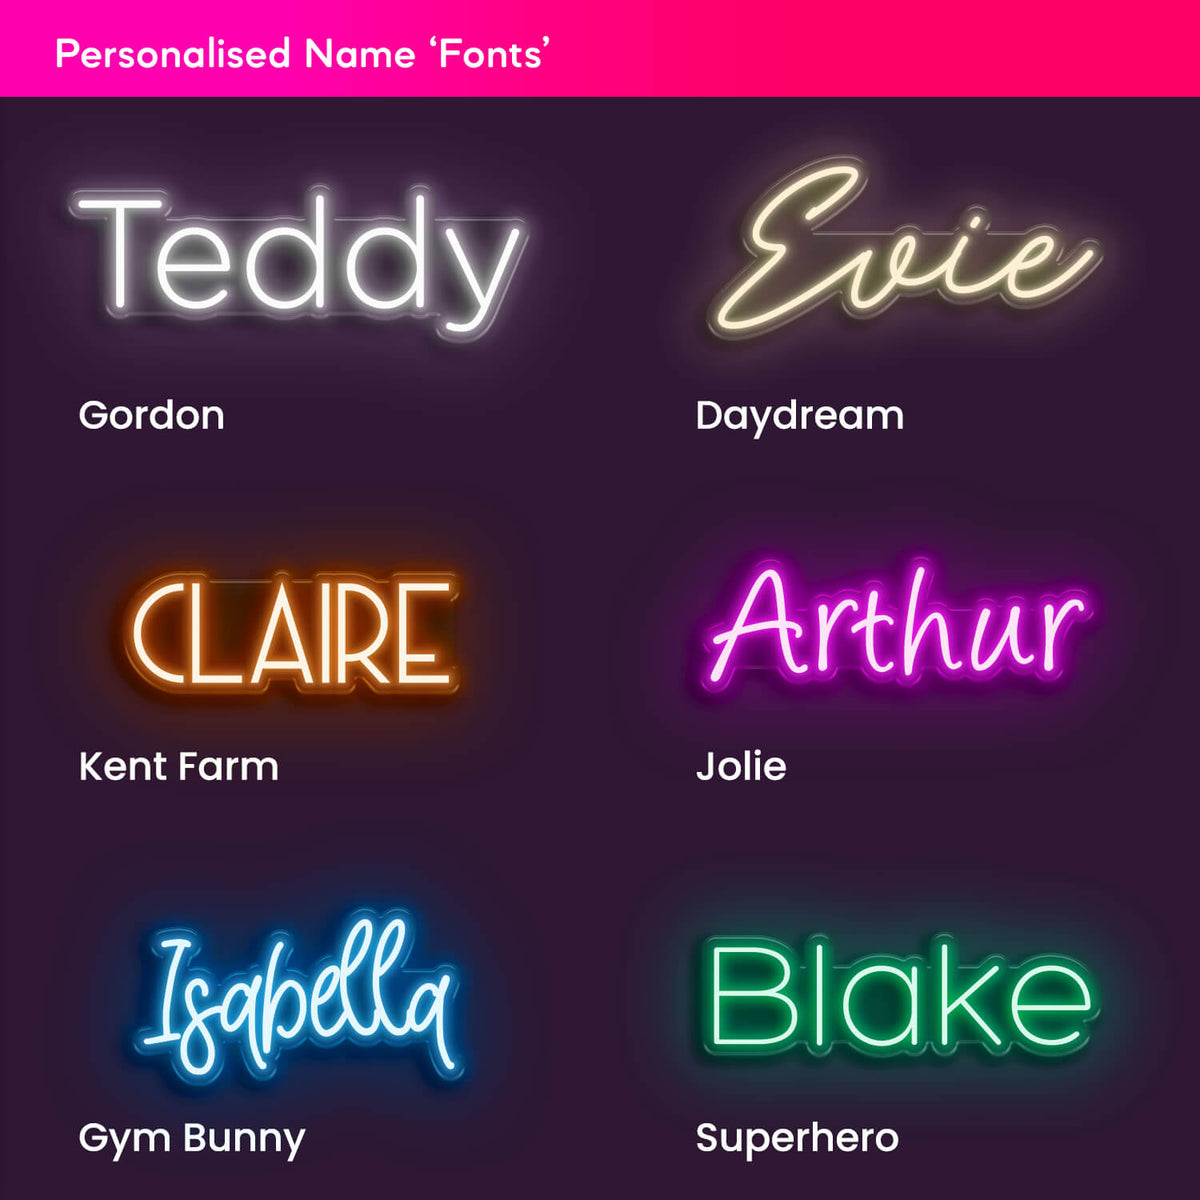 Personalised name fonts